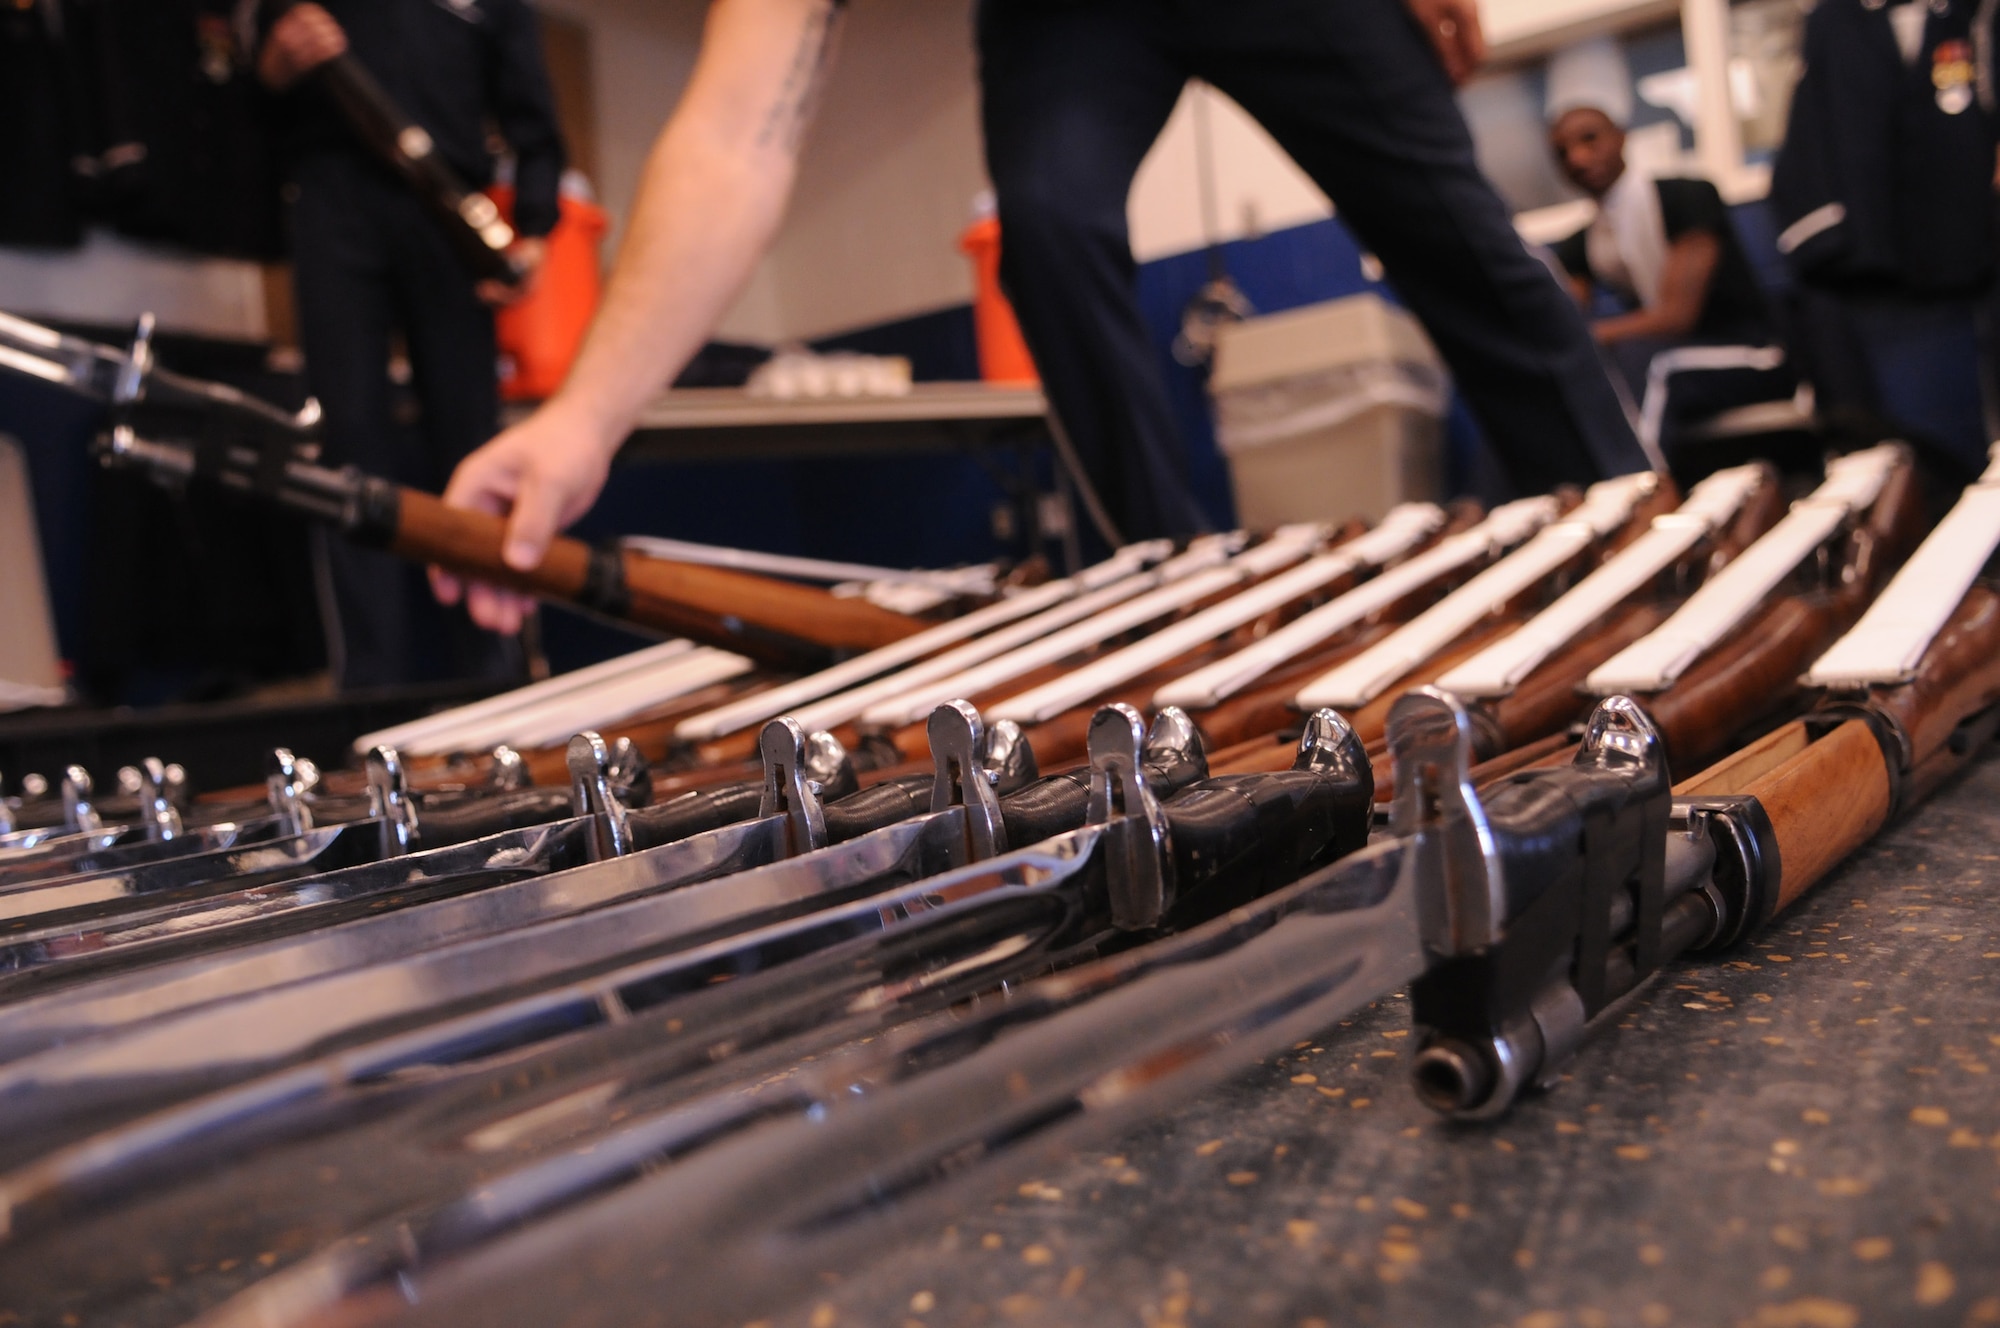 A United States Air Force Honor Guard Drill Team member places his M-1 Garand rifle with fixed bayonet in the inspection line before a performance at Randolph Air Force Base, Texas Nov. 2. The Drill Team members spin this rifle, weighing in excess of 11 pounds, up to 40 miles per hour mere inches from their bodies, making their job extremely dangerous. To prevent any injuries, each weapon is inspected before every performance to make sure it is in proper working condition. The Drill Team tours worldwide representing all Airmen while showcasing Air Force precision and professionalism and personifying the integrity, discipline, and teamwork of every Airman and every Air Force mission. During the Air Force Honor Guard's 60-year history, their traveling component, the Drill Team, has performed in every state of the union and many countries abroad. (U.S. Air Force photo by Senior Airman Sean Adams)